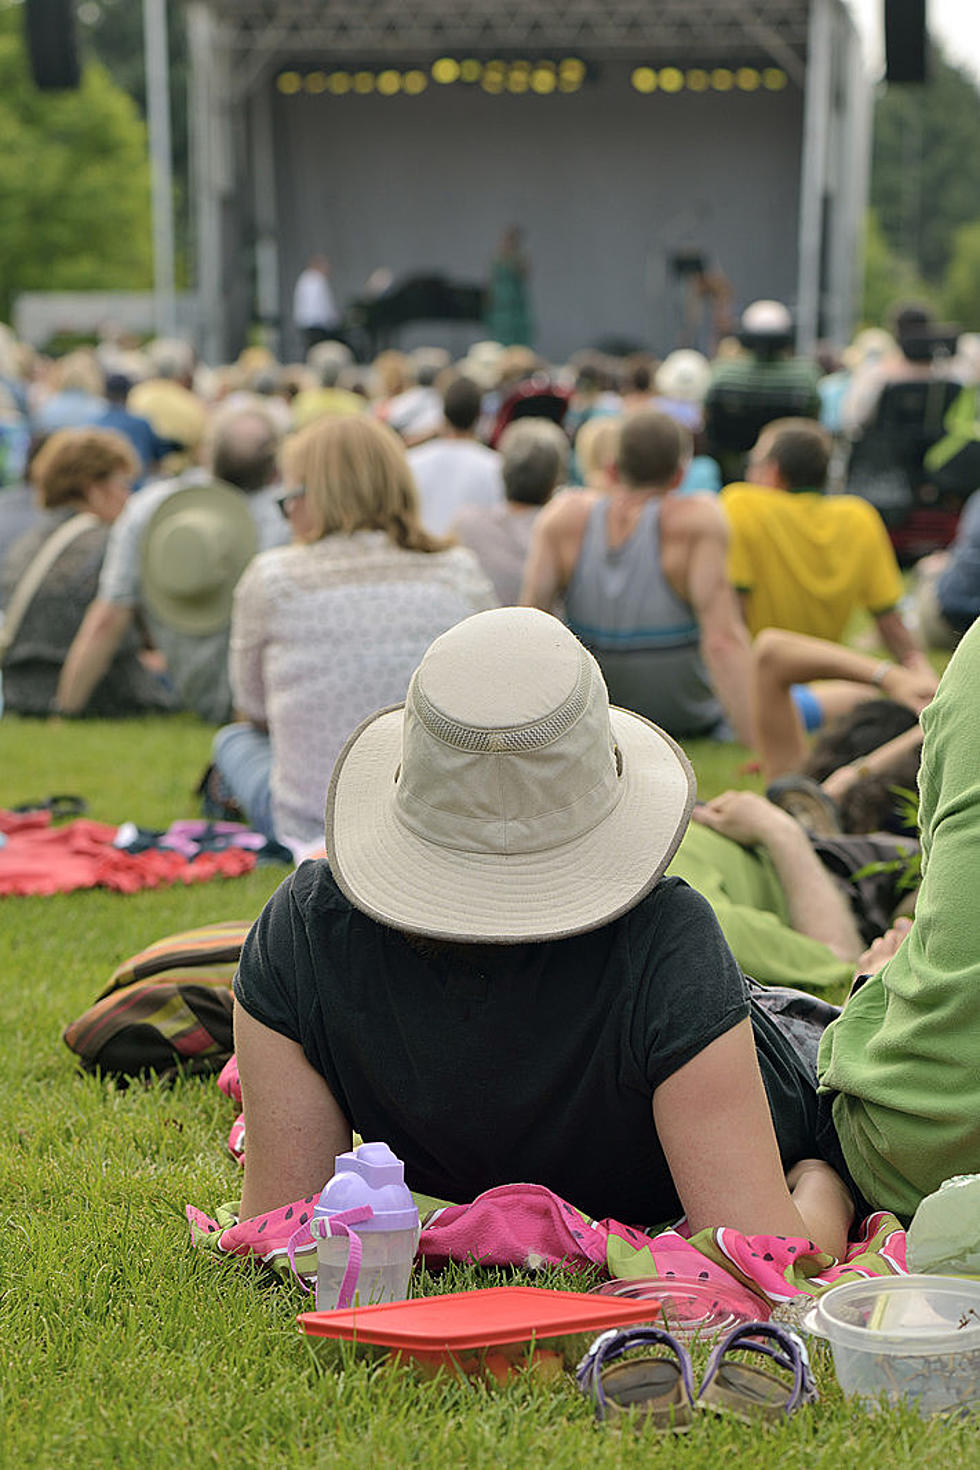 Falls Township Summer Concert Series Going on Now